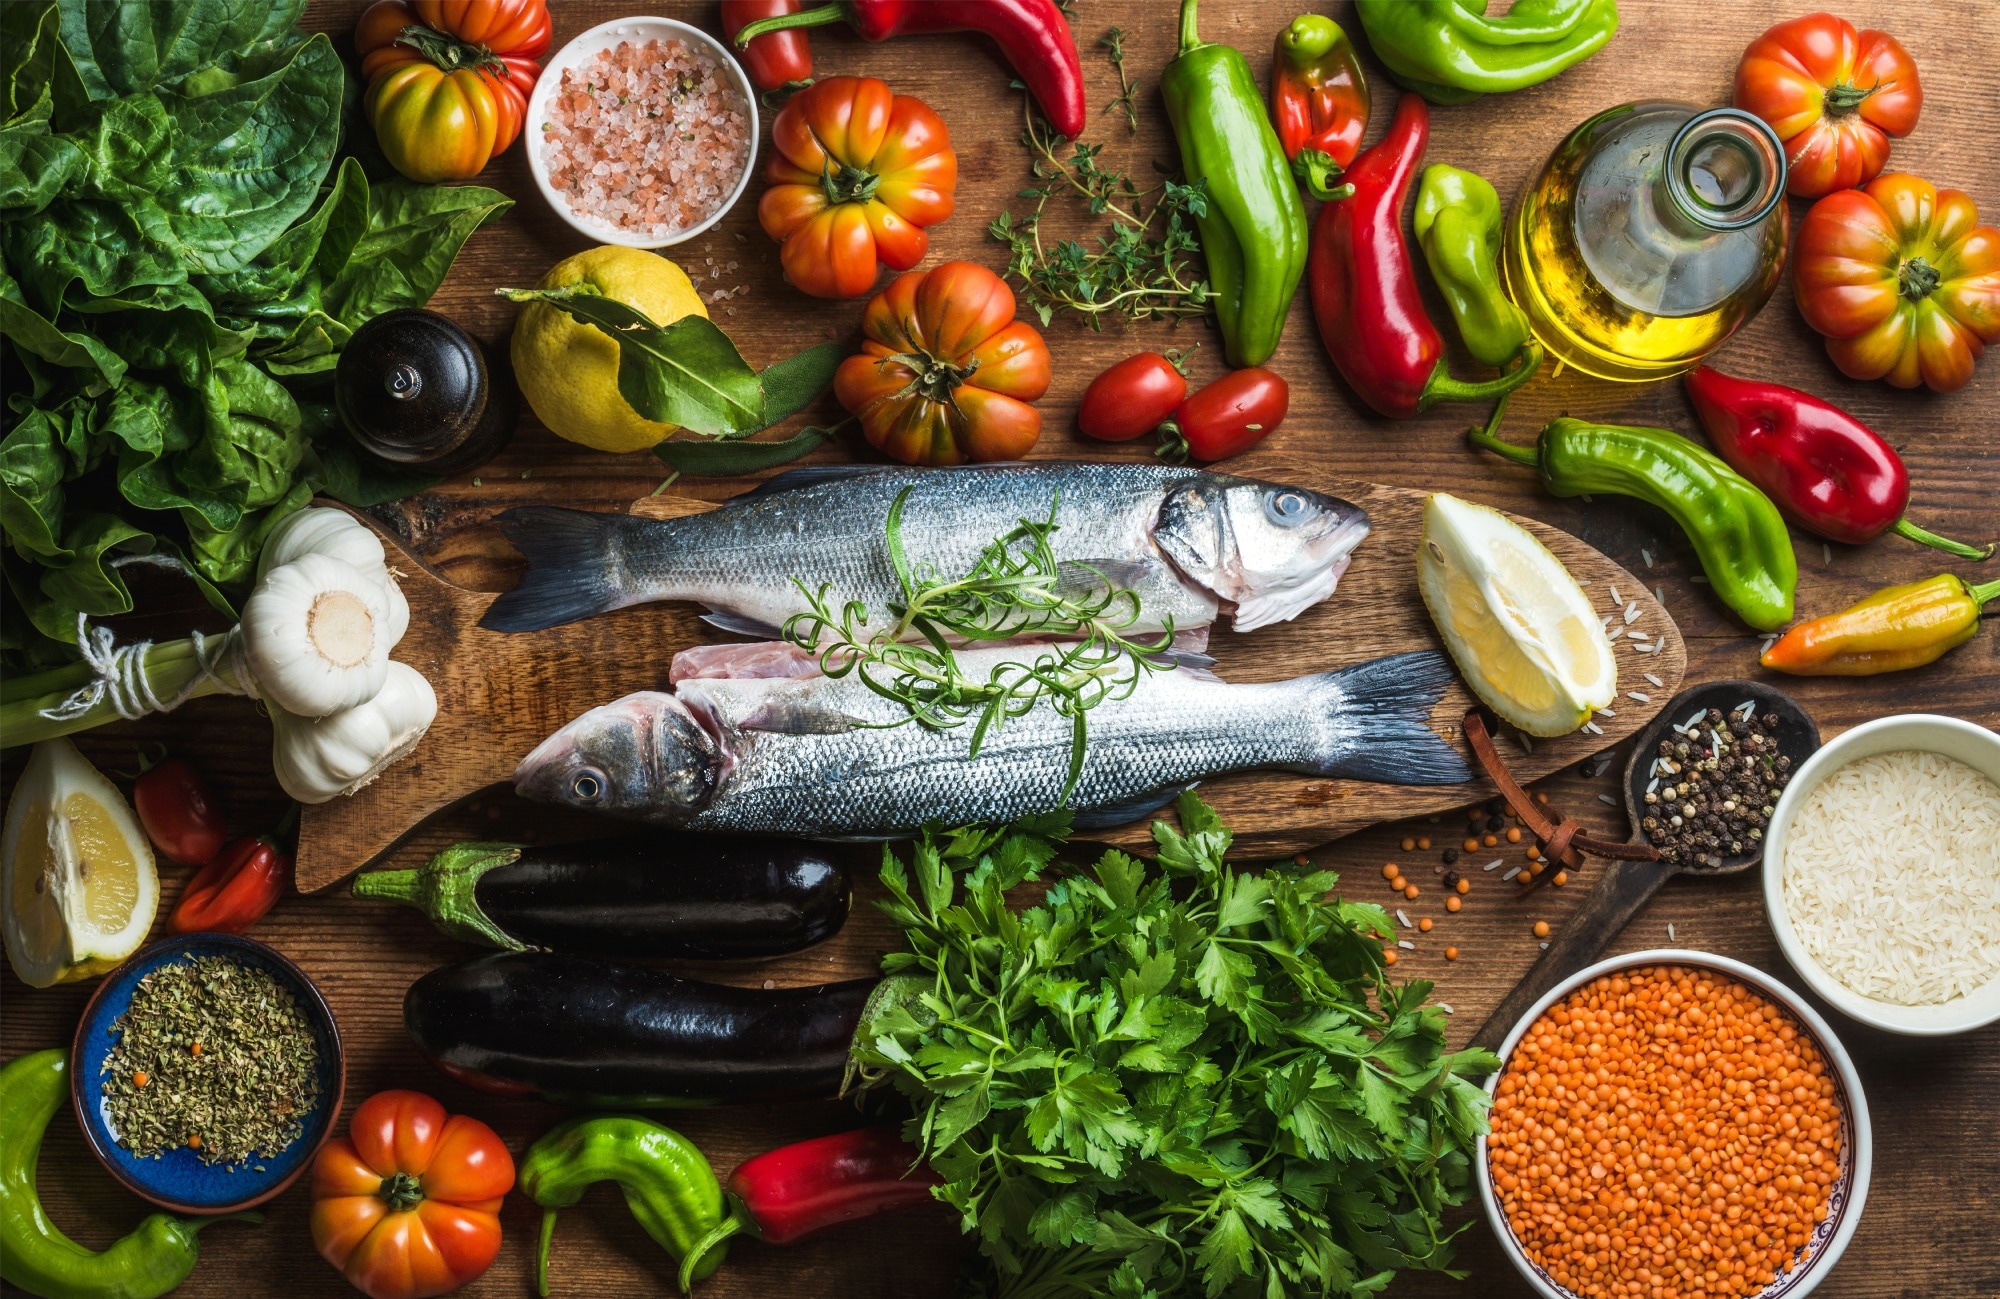 10 Myth-Busting Money-Saving Tips You Need Right Now! | Mediterranean Diet Budget